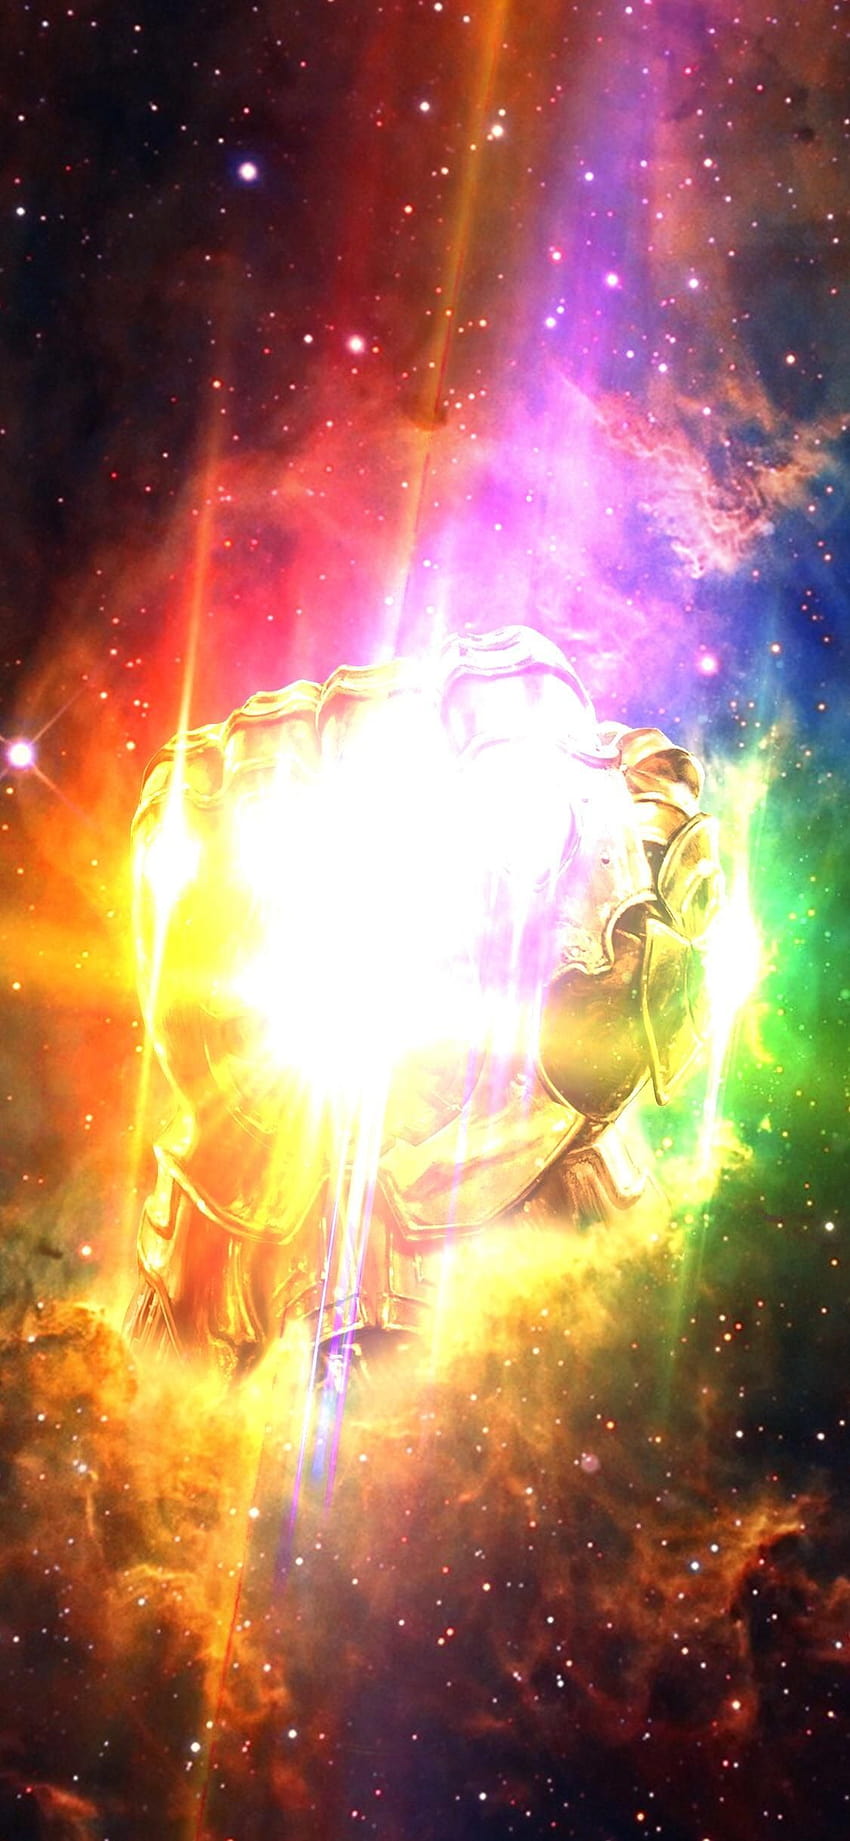 So I made an Infinity War ... with the iPhone X screen, mind stone HD phone wallpaper